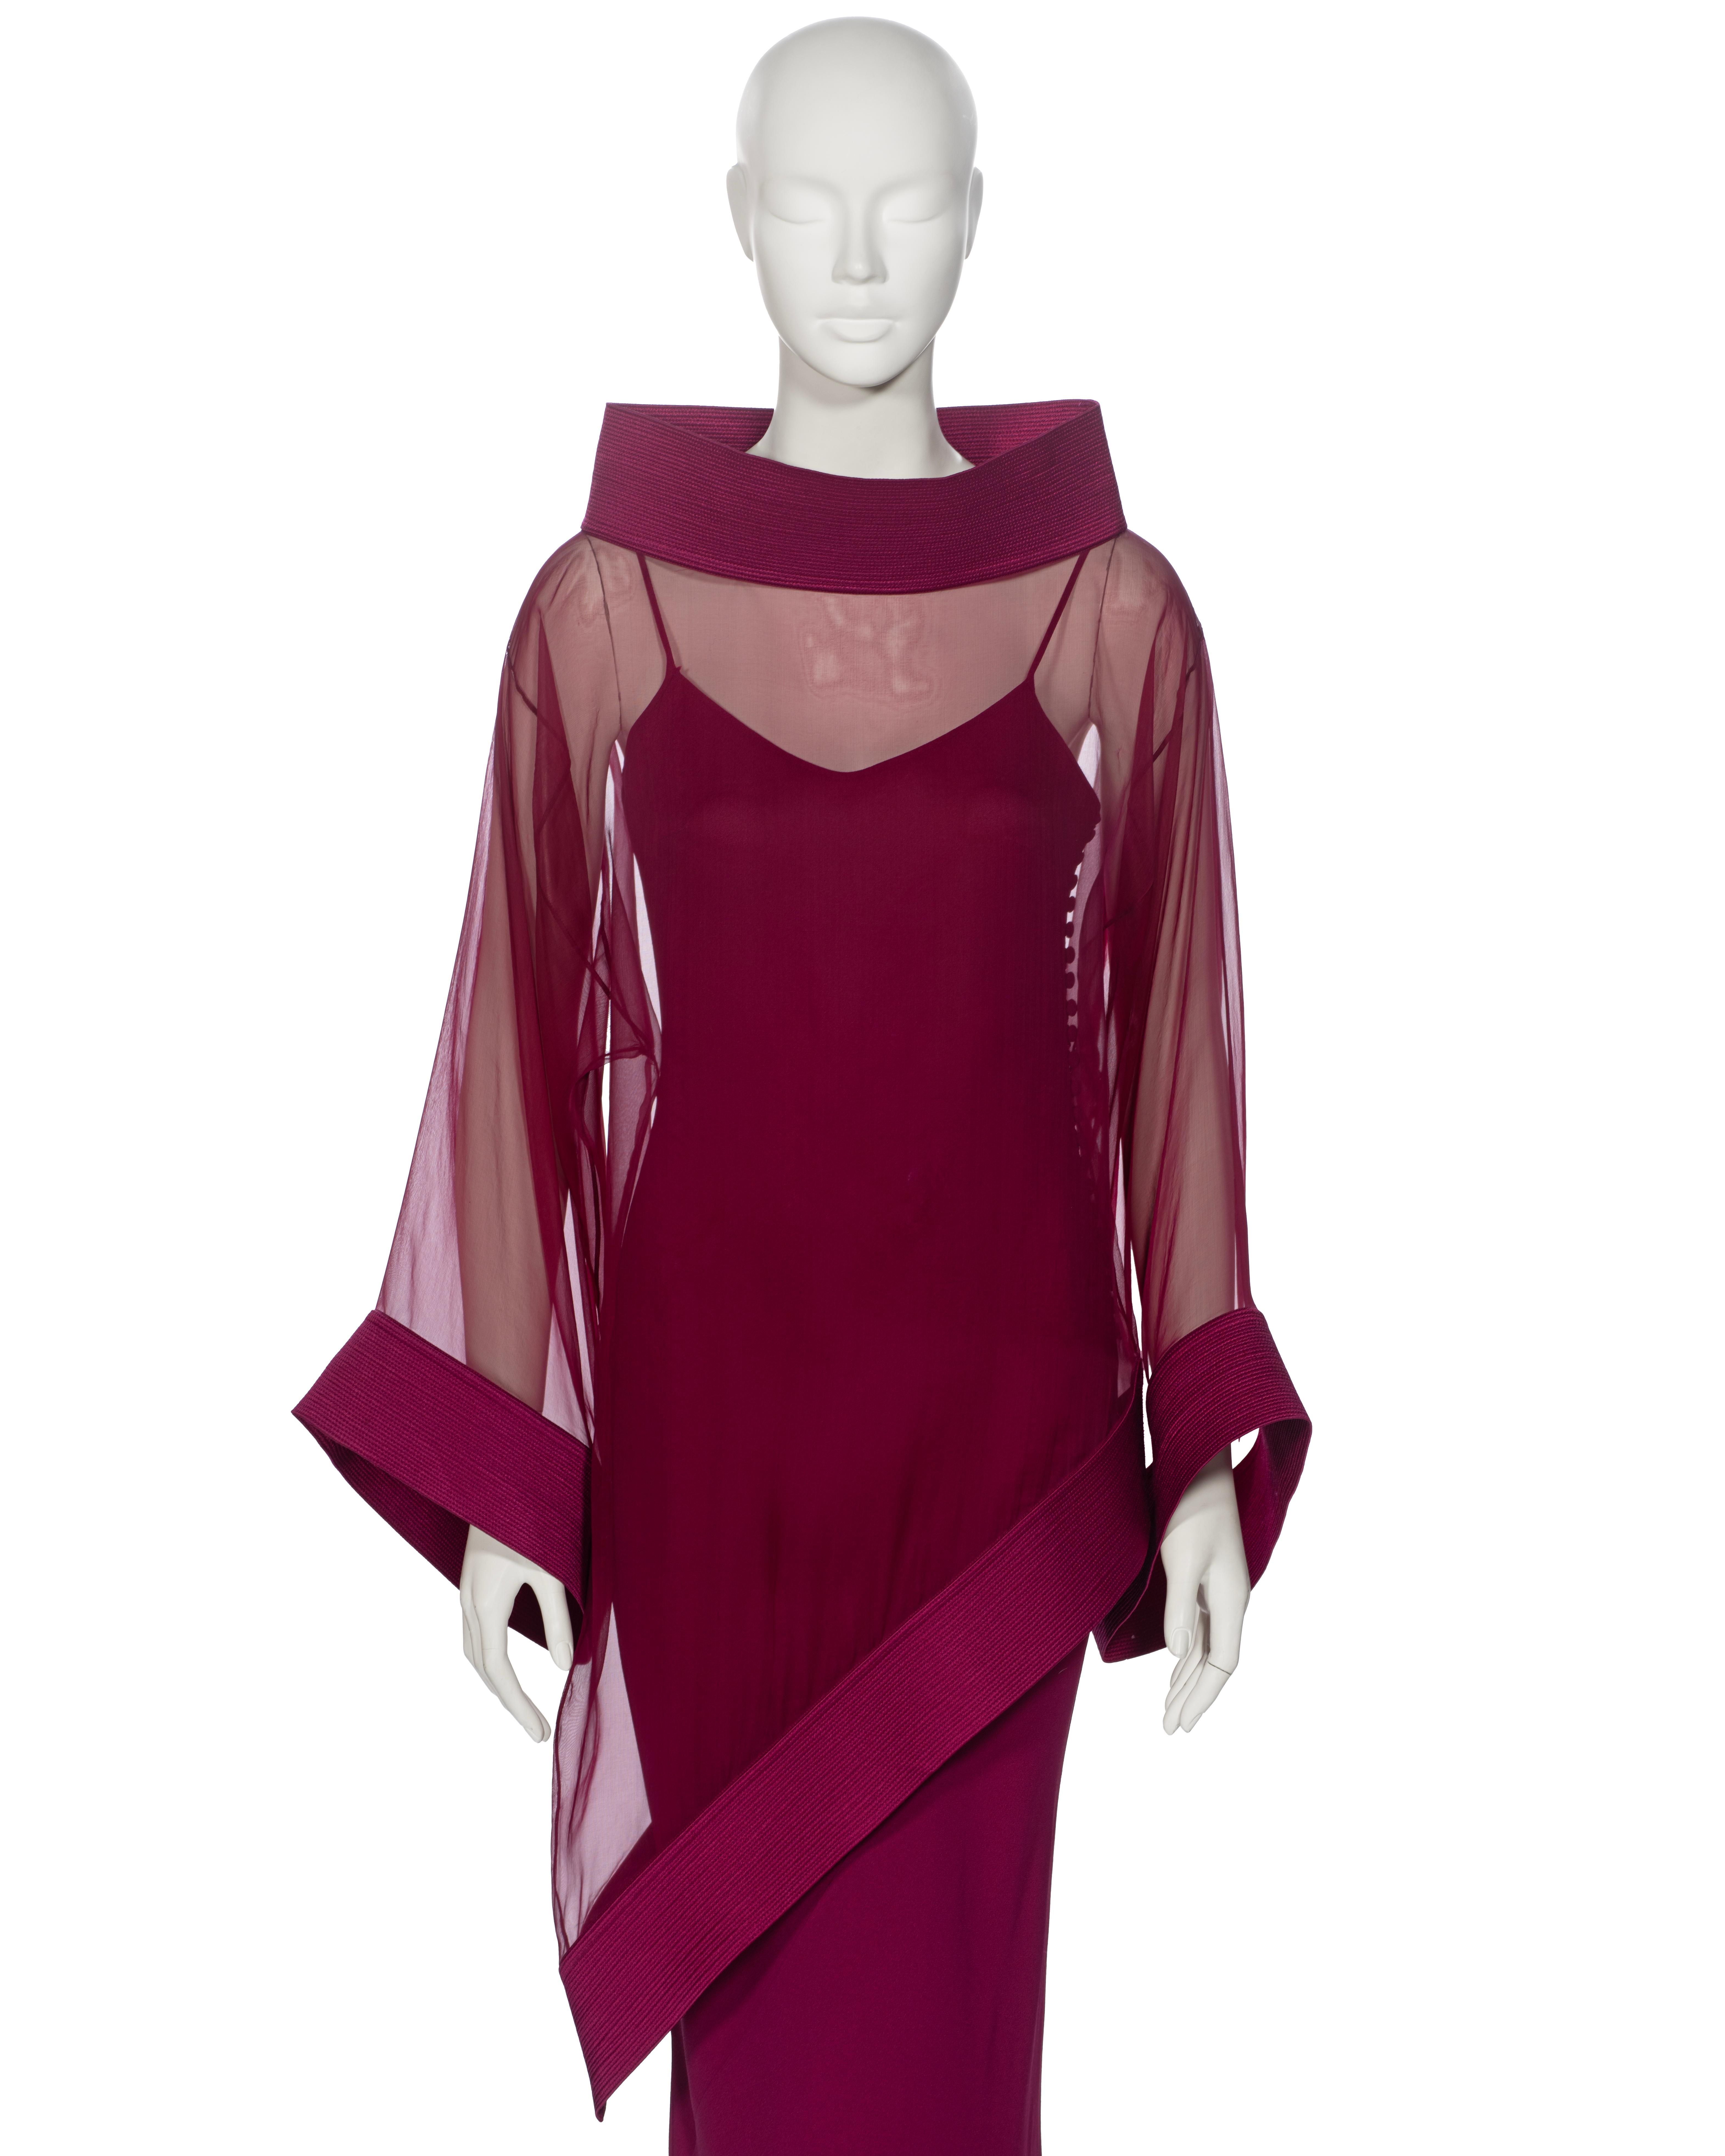 Christian Dior by John Galliano Claret Evening Dress and Tunic Ensemble, fw 1999 In Excellent Condition For Sale In London, GB